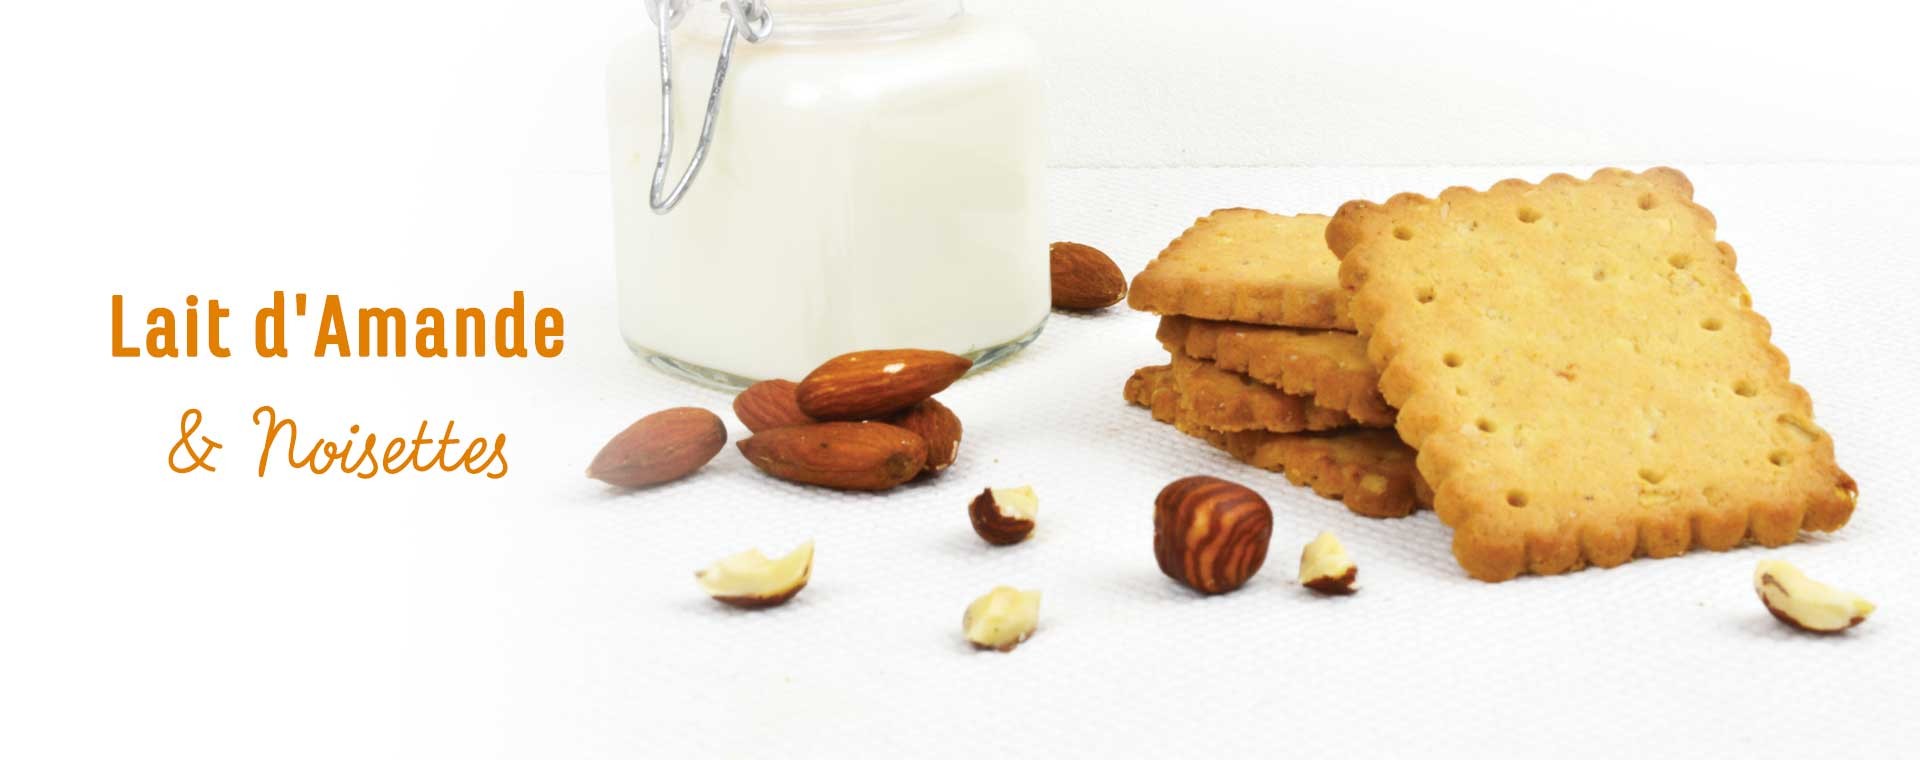 organic biscuits with hazelnuts and almond milk